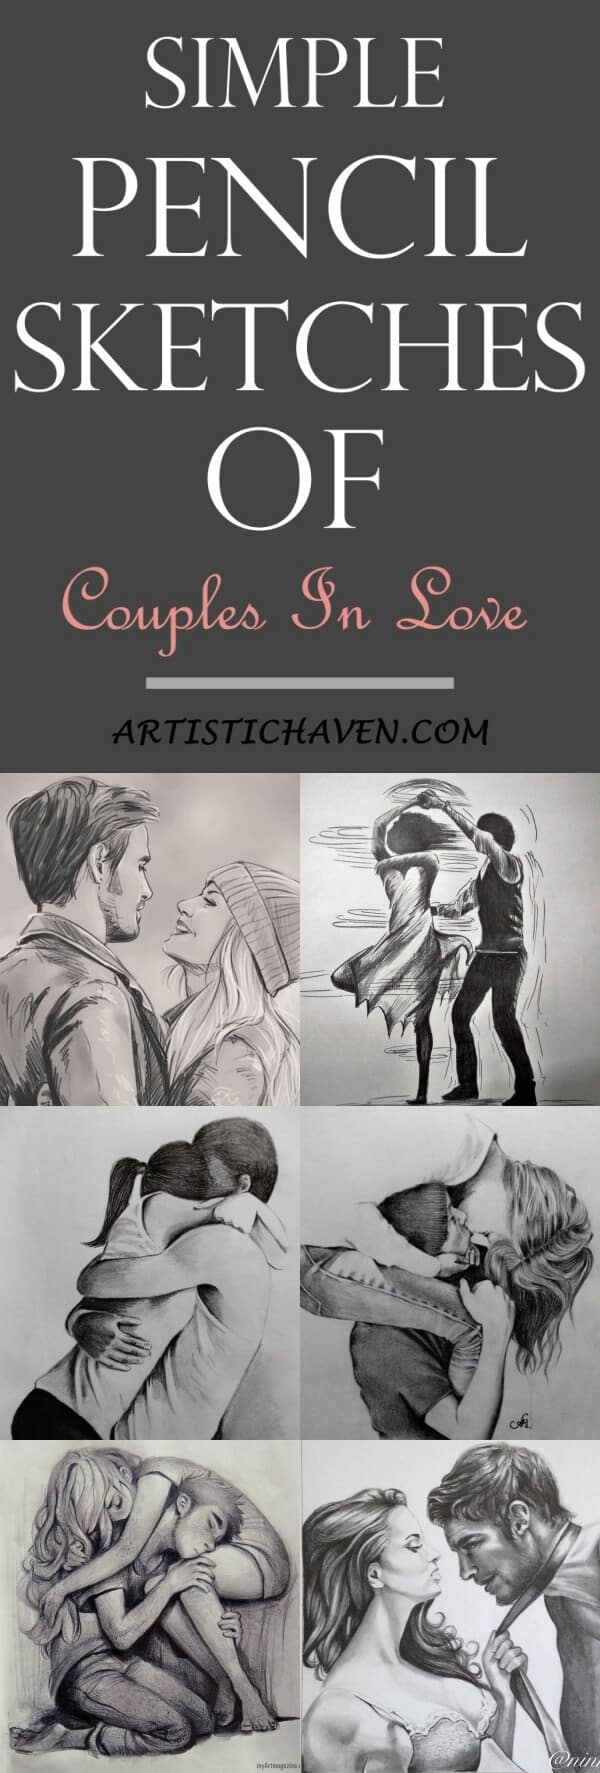 100+] Cute Couple Drawing Pictures | Wallpapers.com